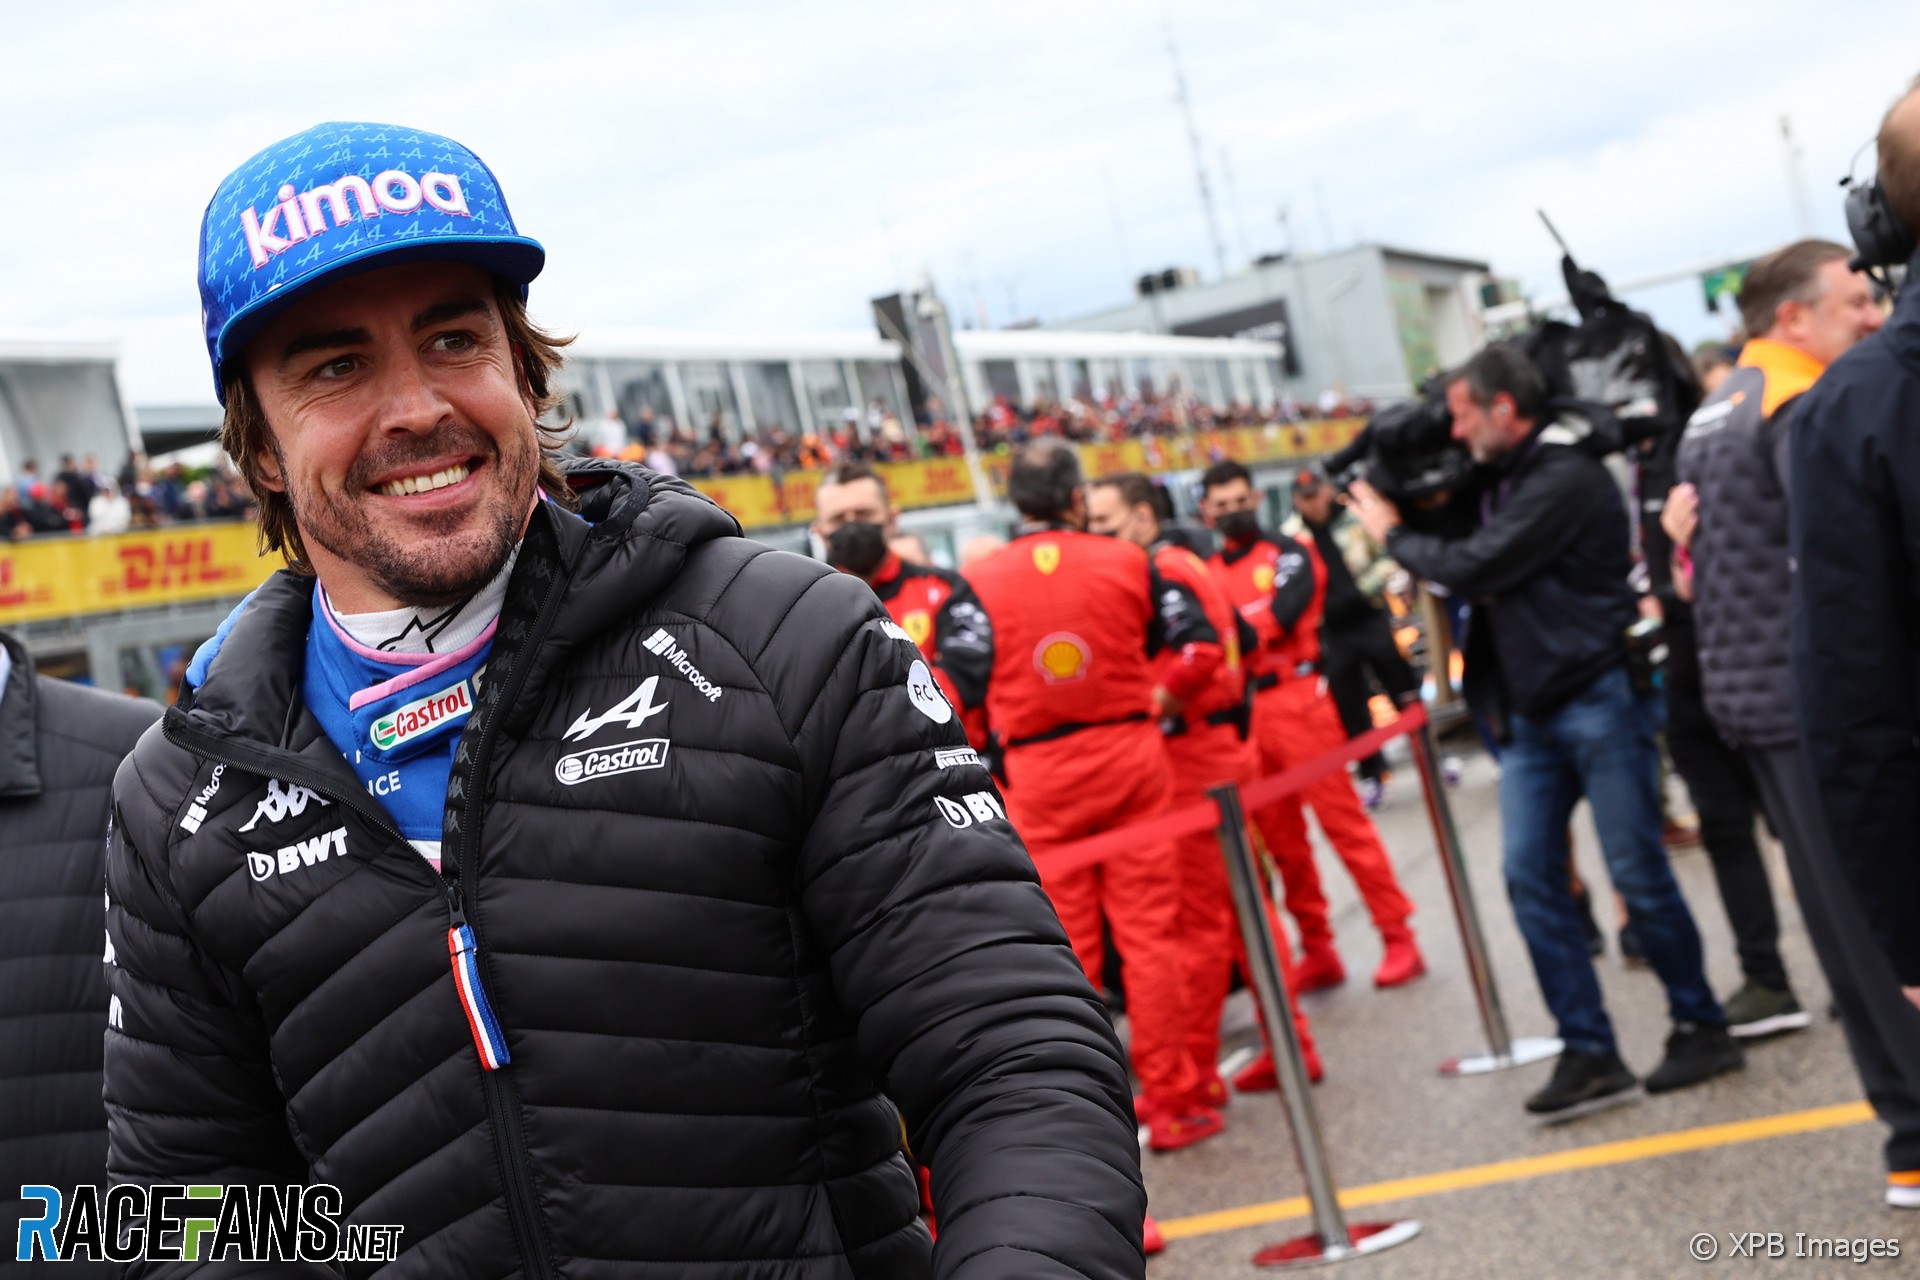 Alonso unlikely to leave F1 until he sees someone “beating me on pure ability” | RaceFans Round-up